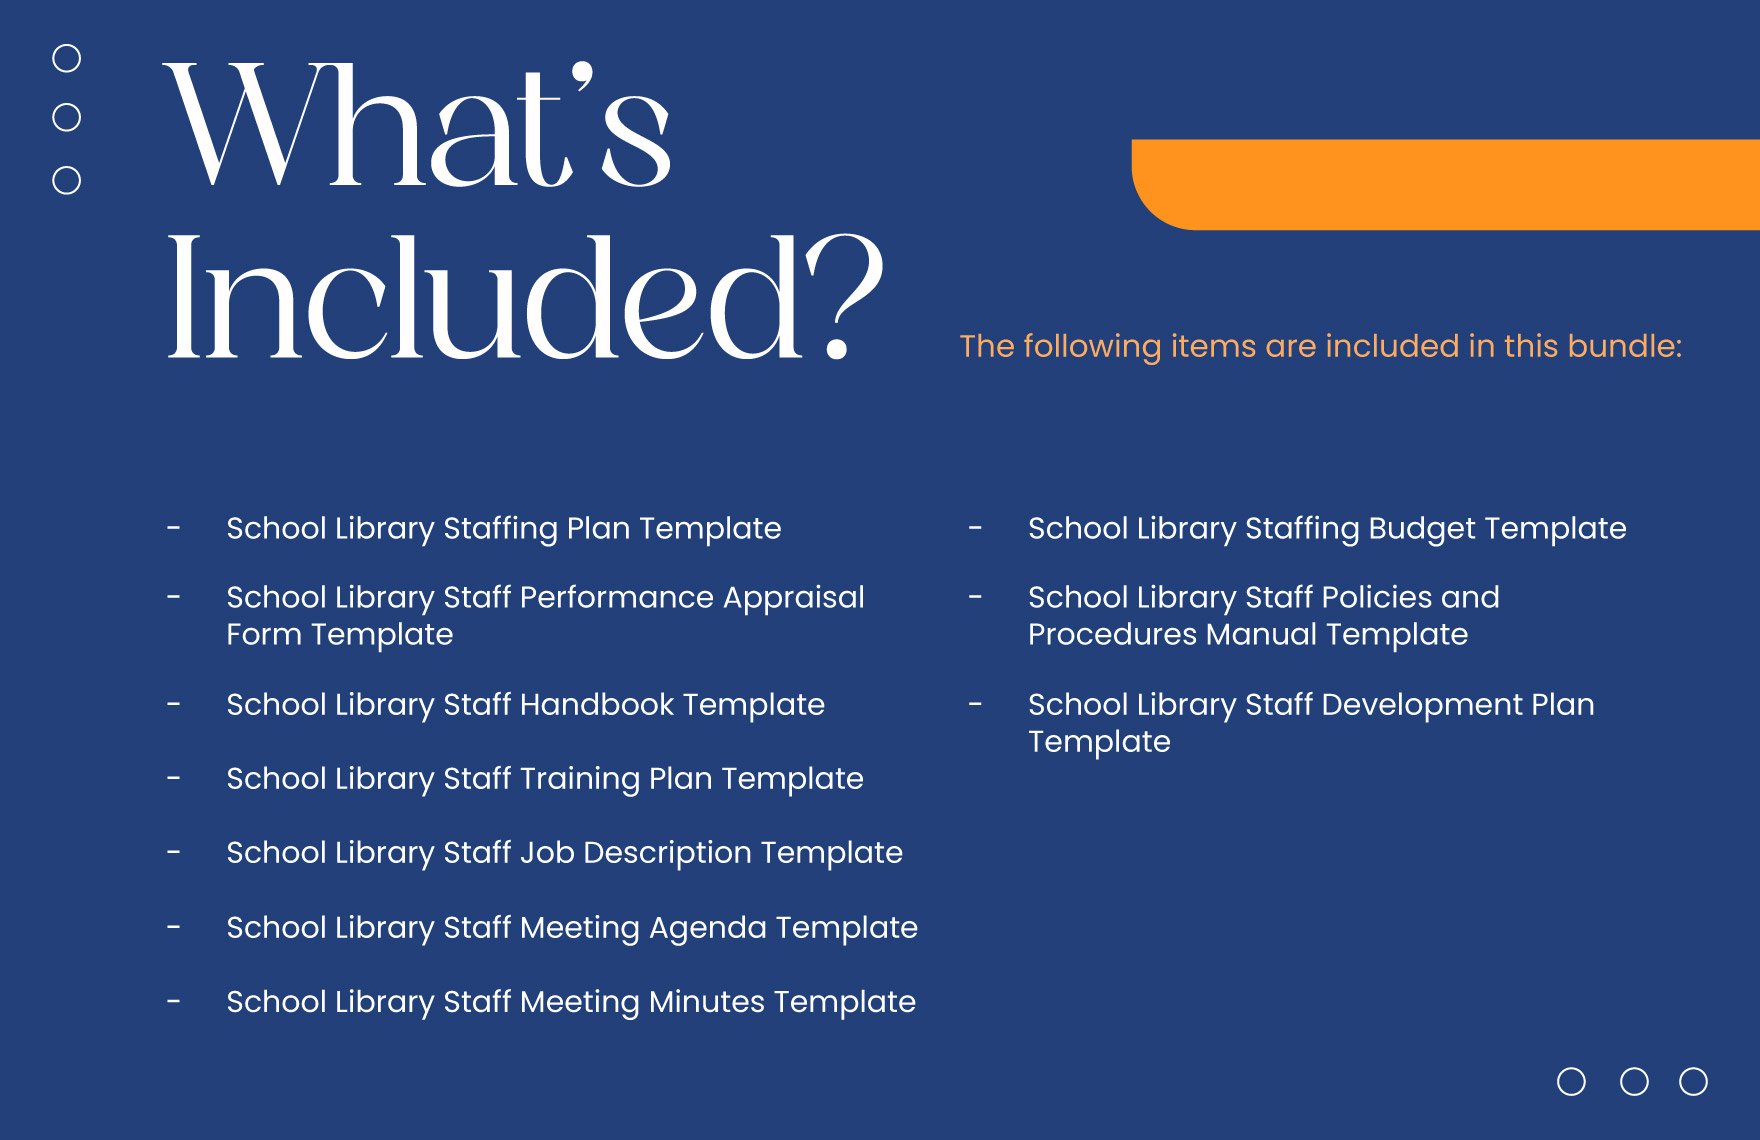 10 Education Library Staffing and Management Template Bundle